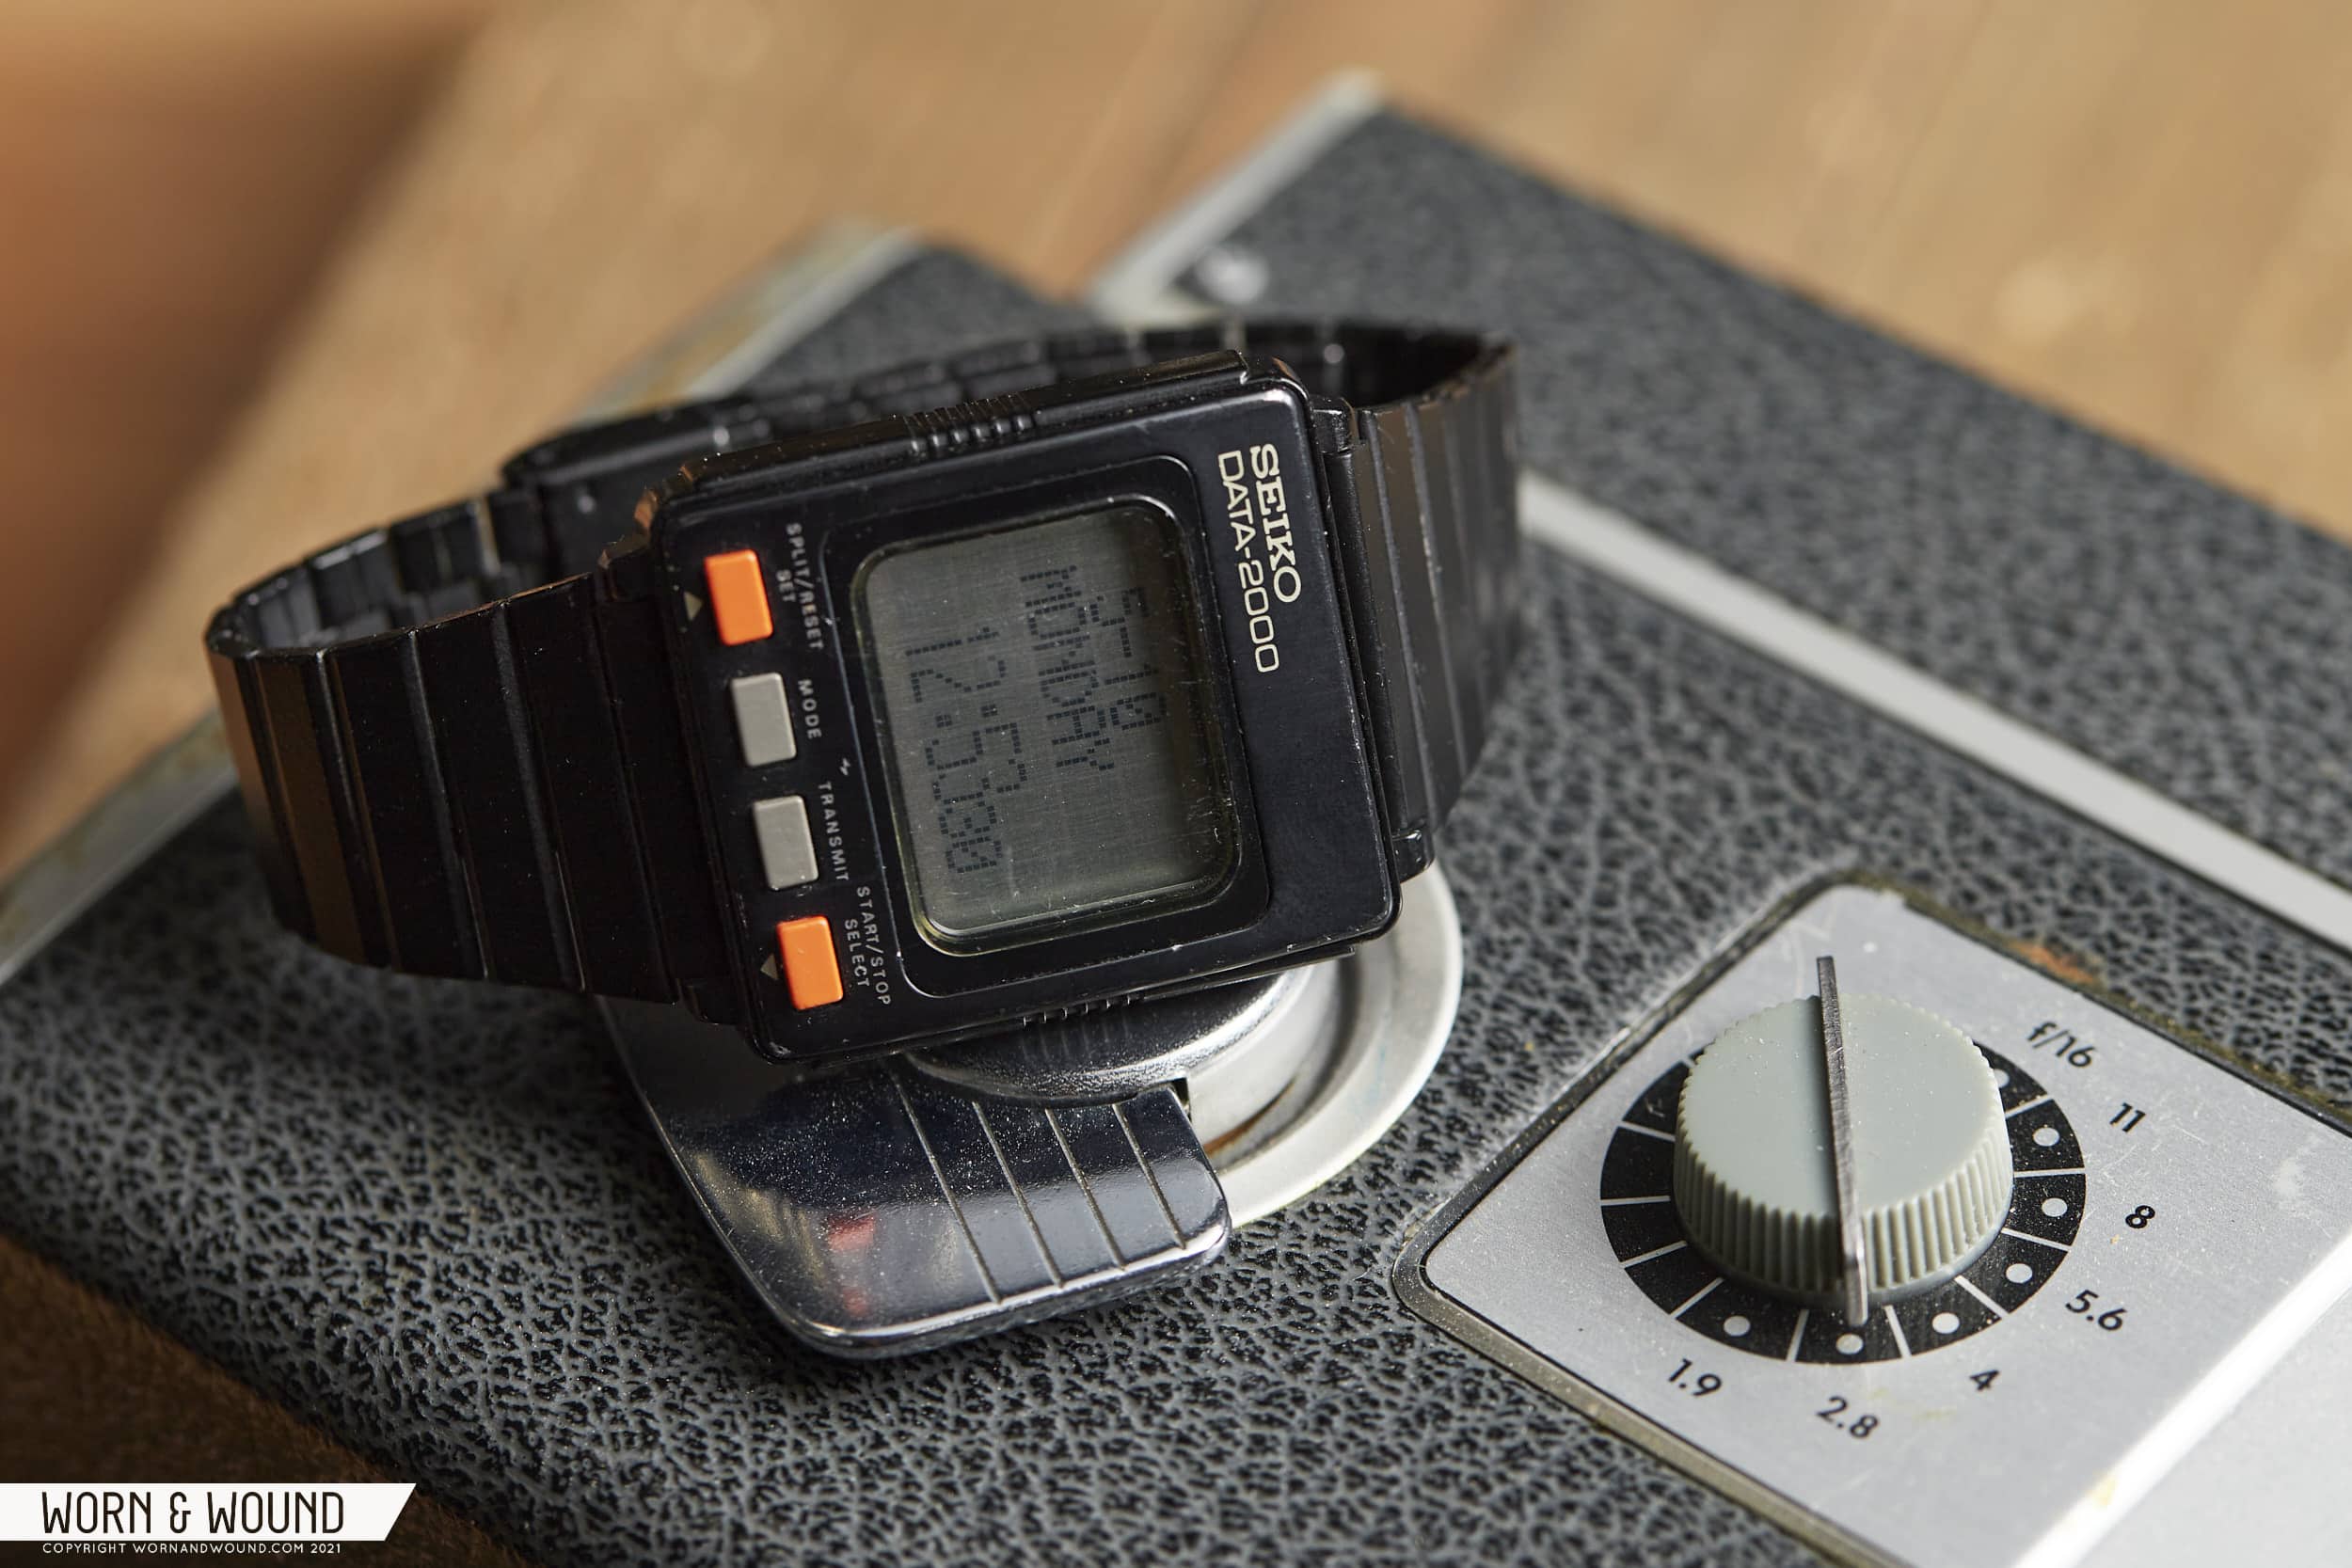 From Deep in the Watch Box: The Seiko Data 2000 - Worn & Wound